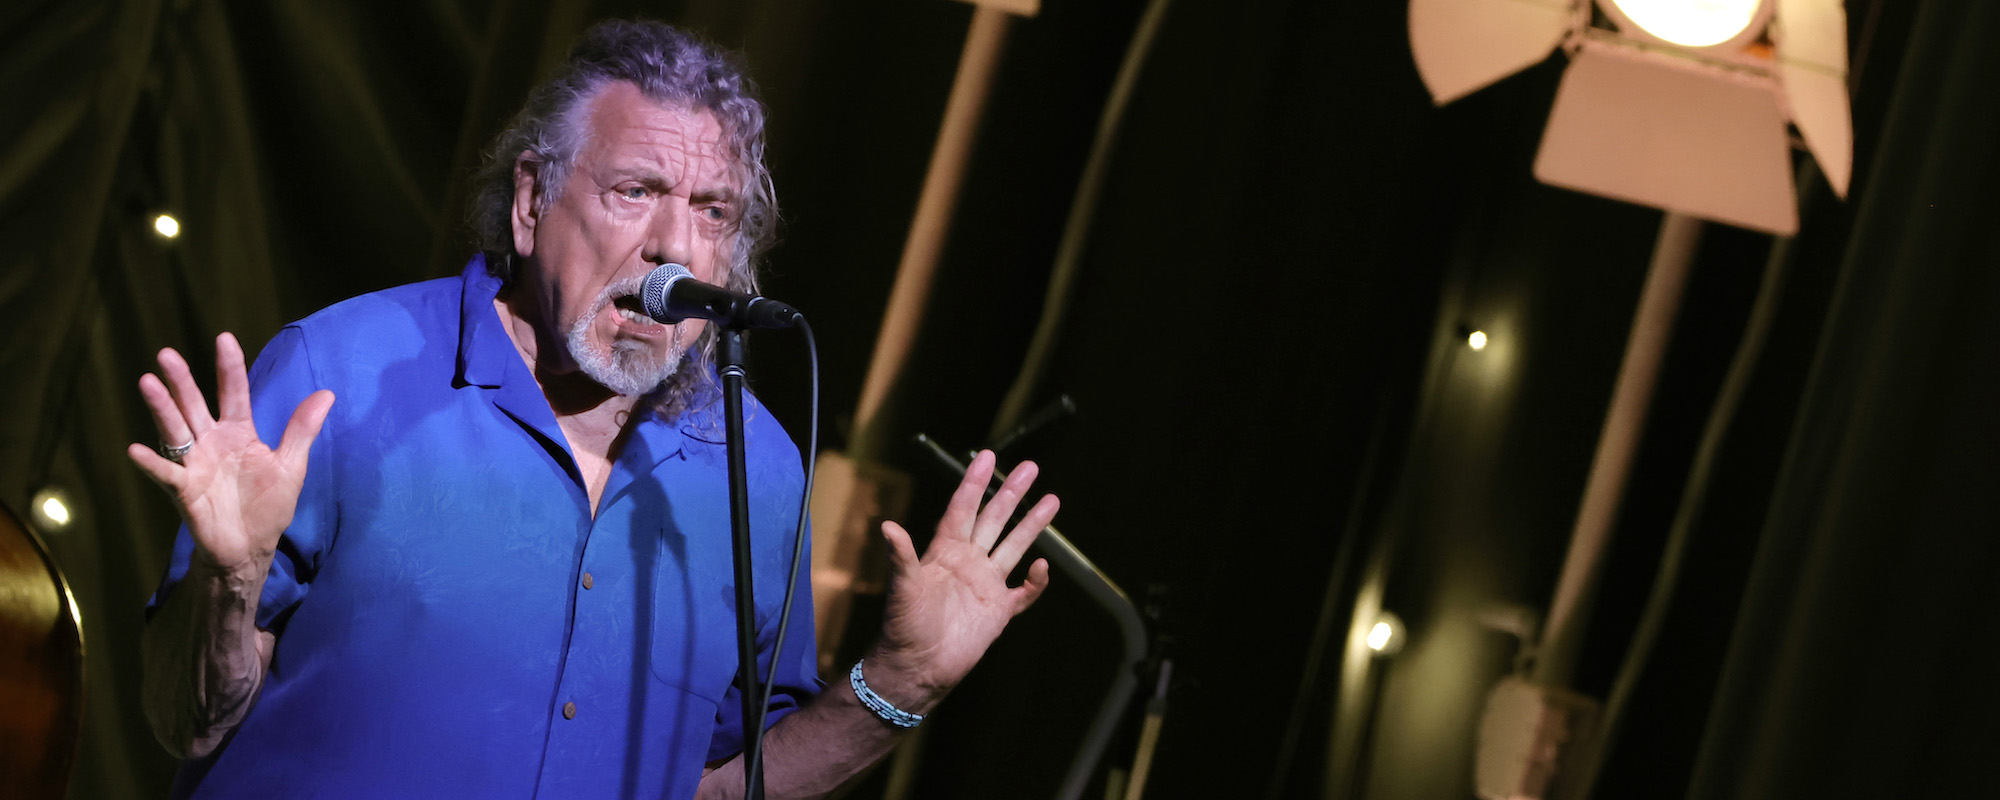 Robert Plant is Not Ready to Retire: “I’ve Got Something to Say”